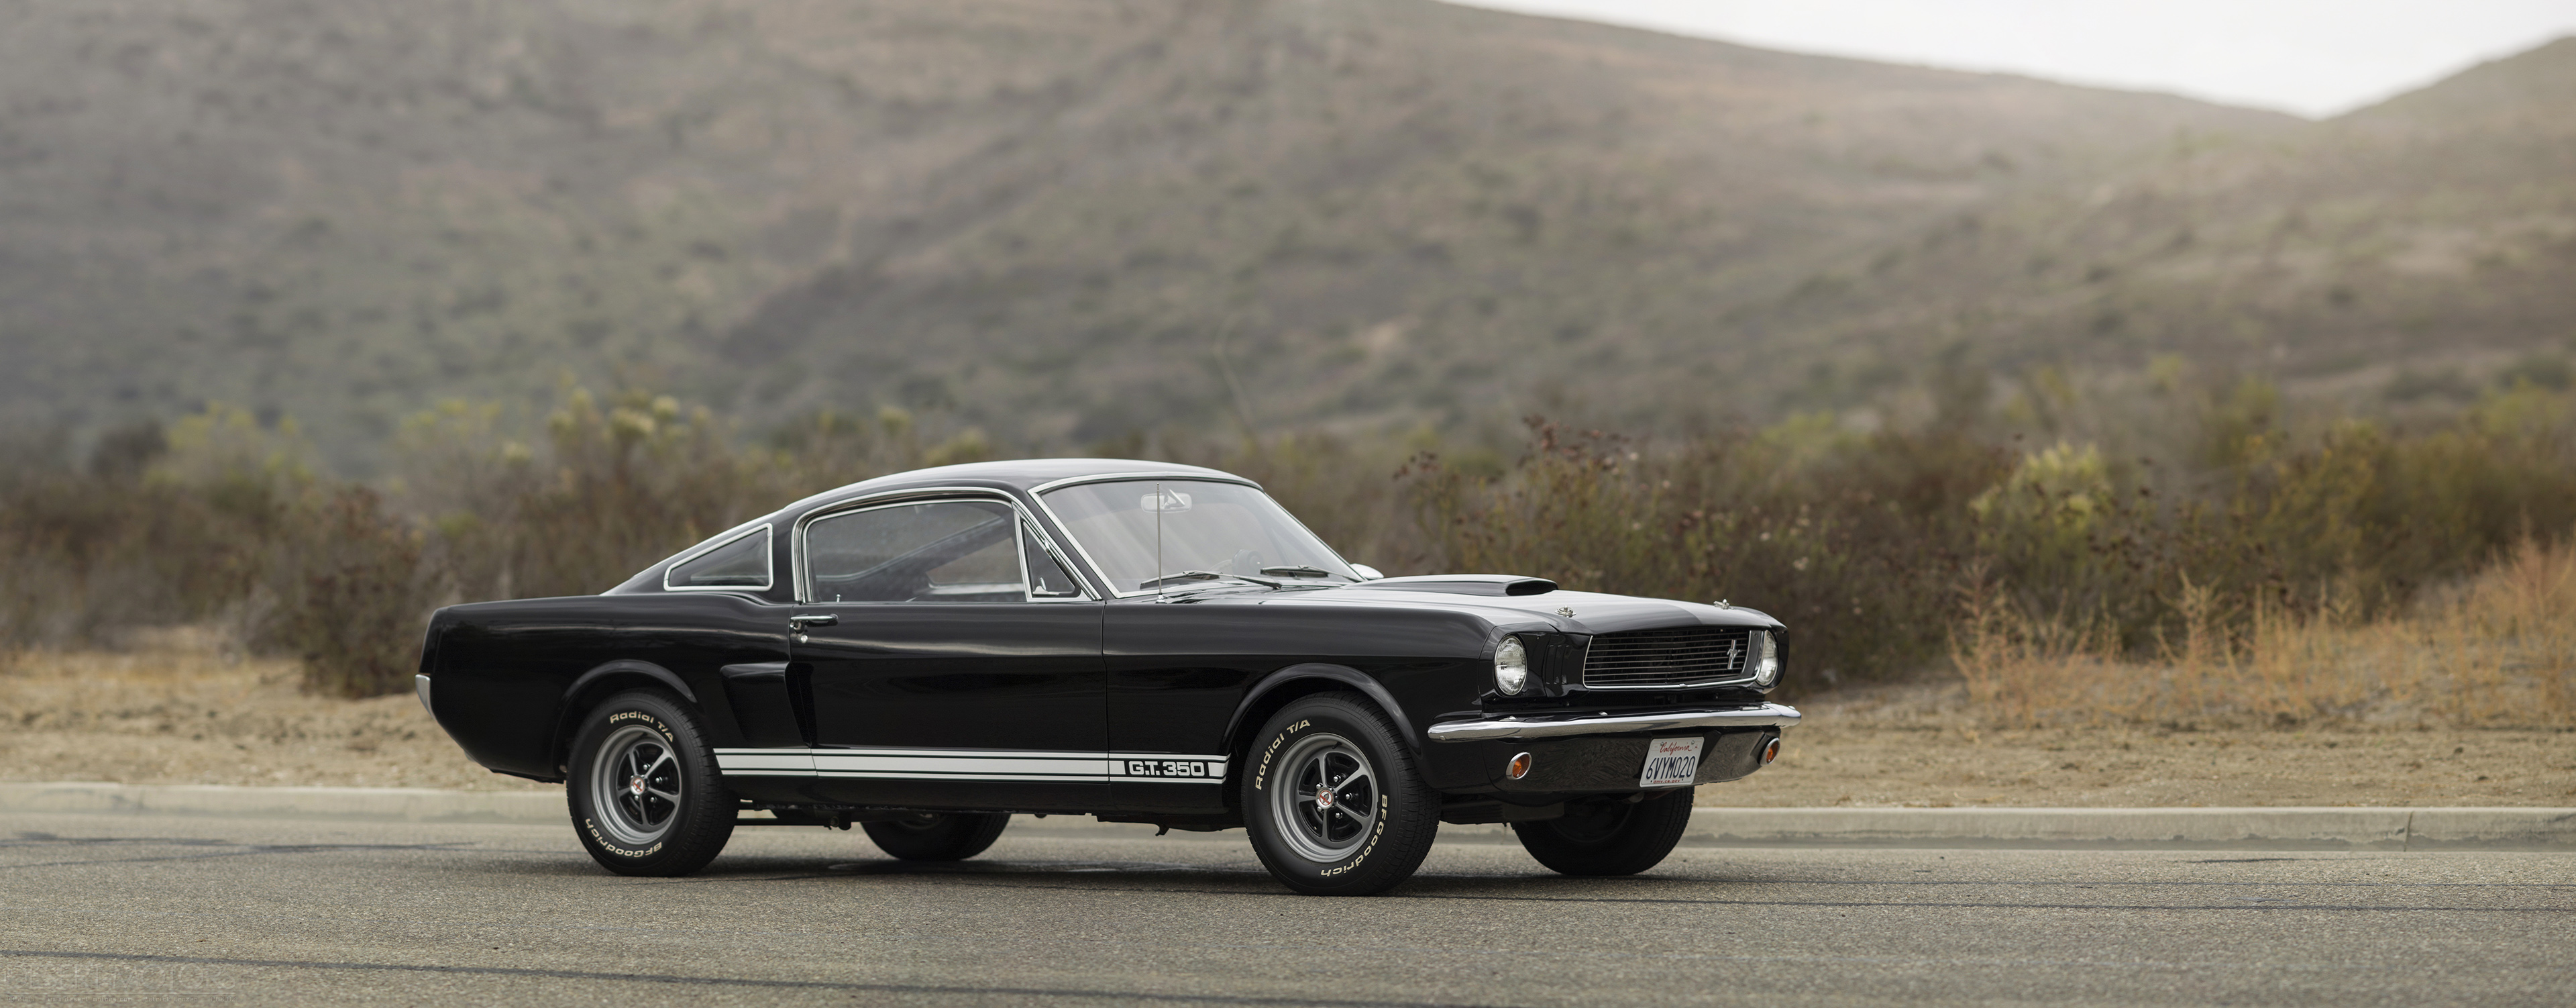 Shelby GT 350 Mustang GT350 Black Cars Muscle Cars American Cars Pony Cars Classic Car 3840x1502